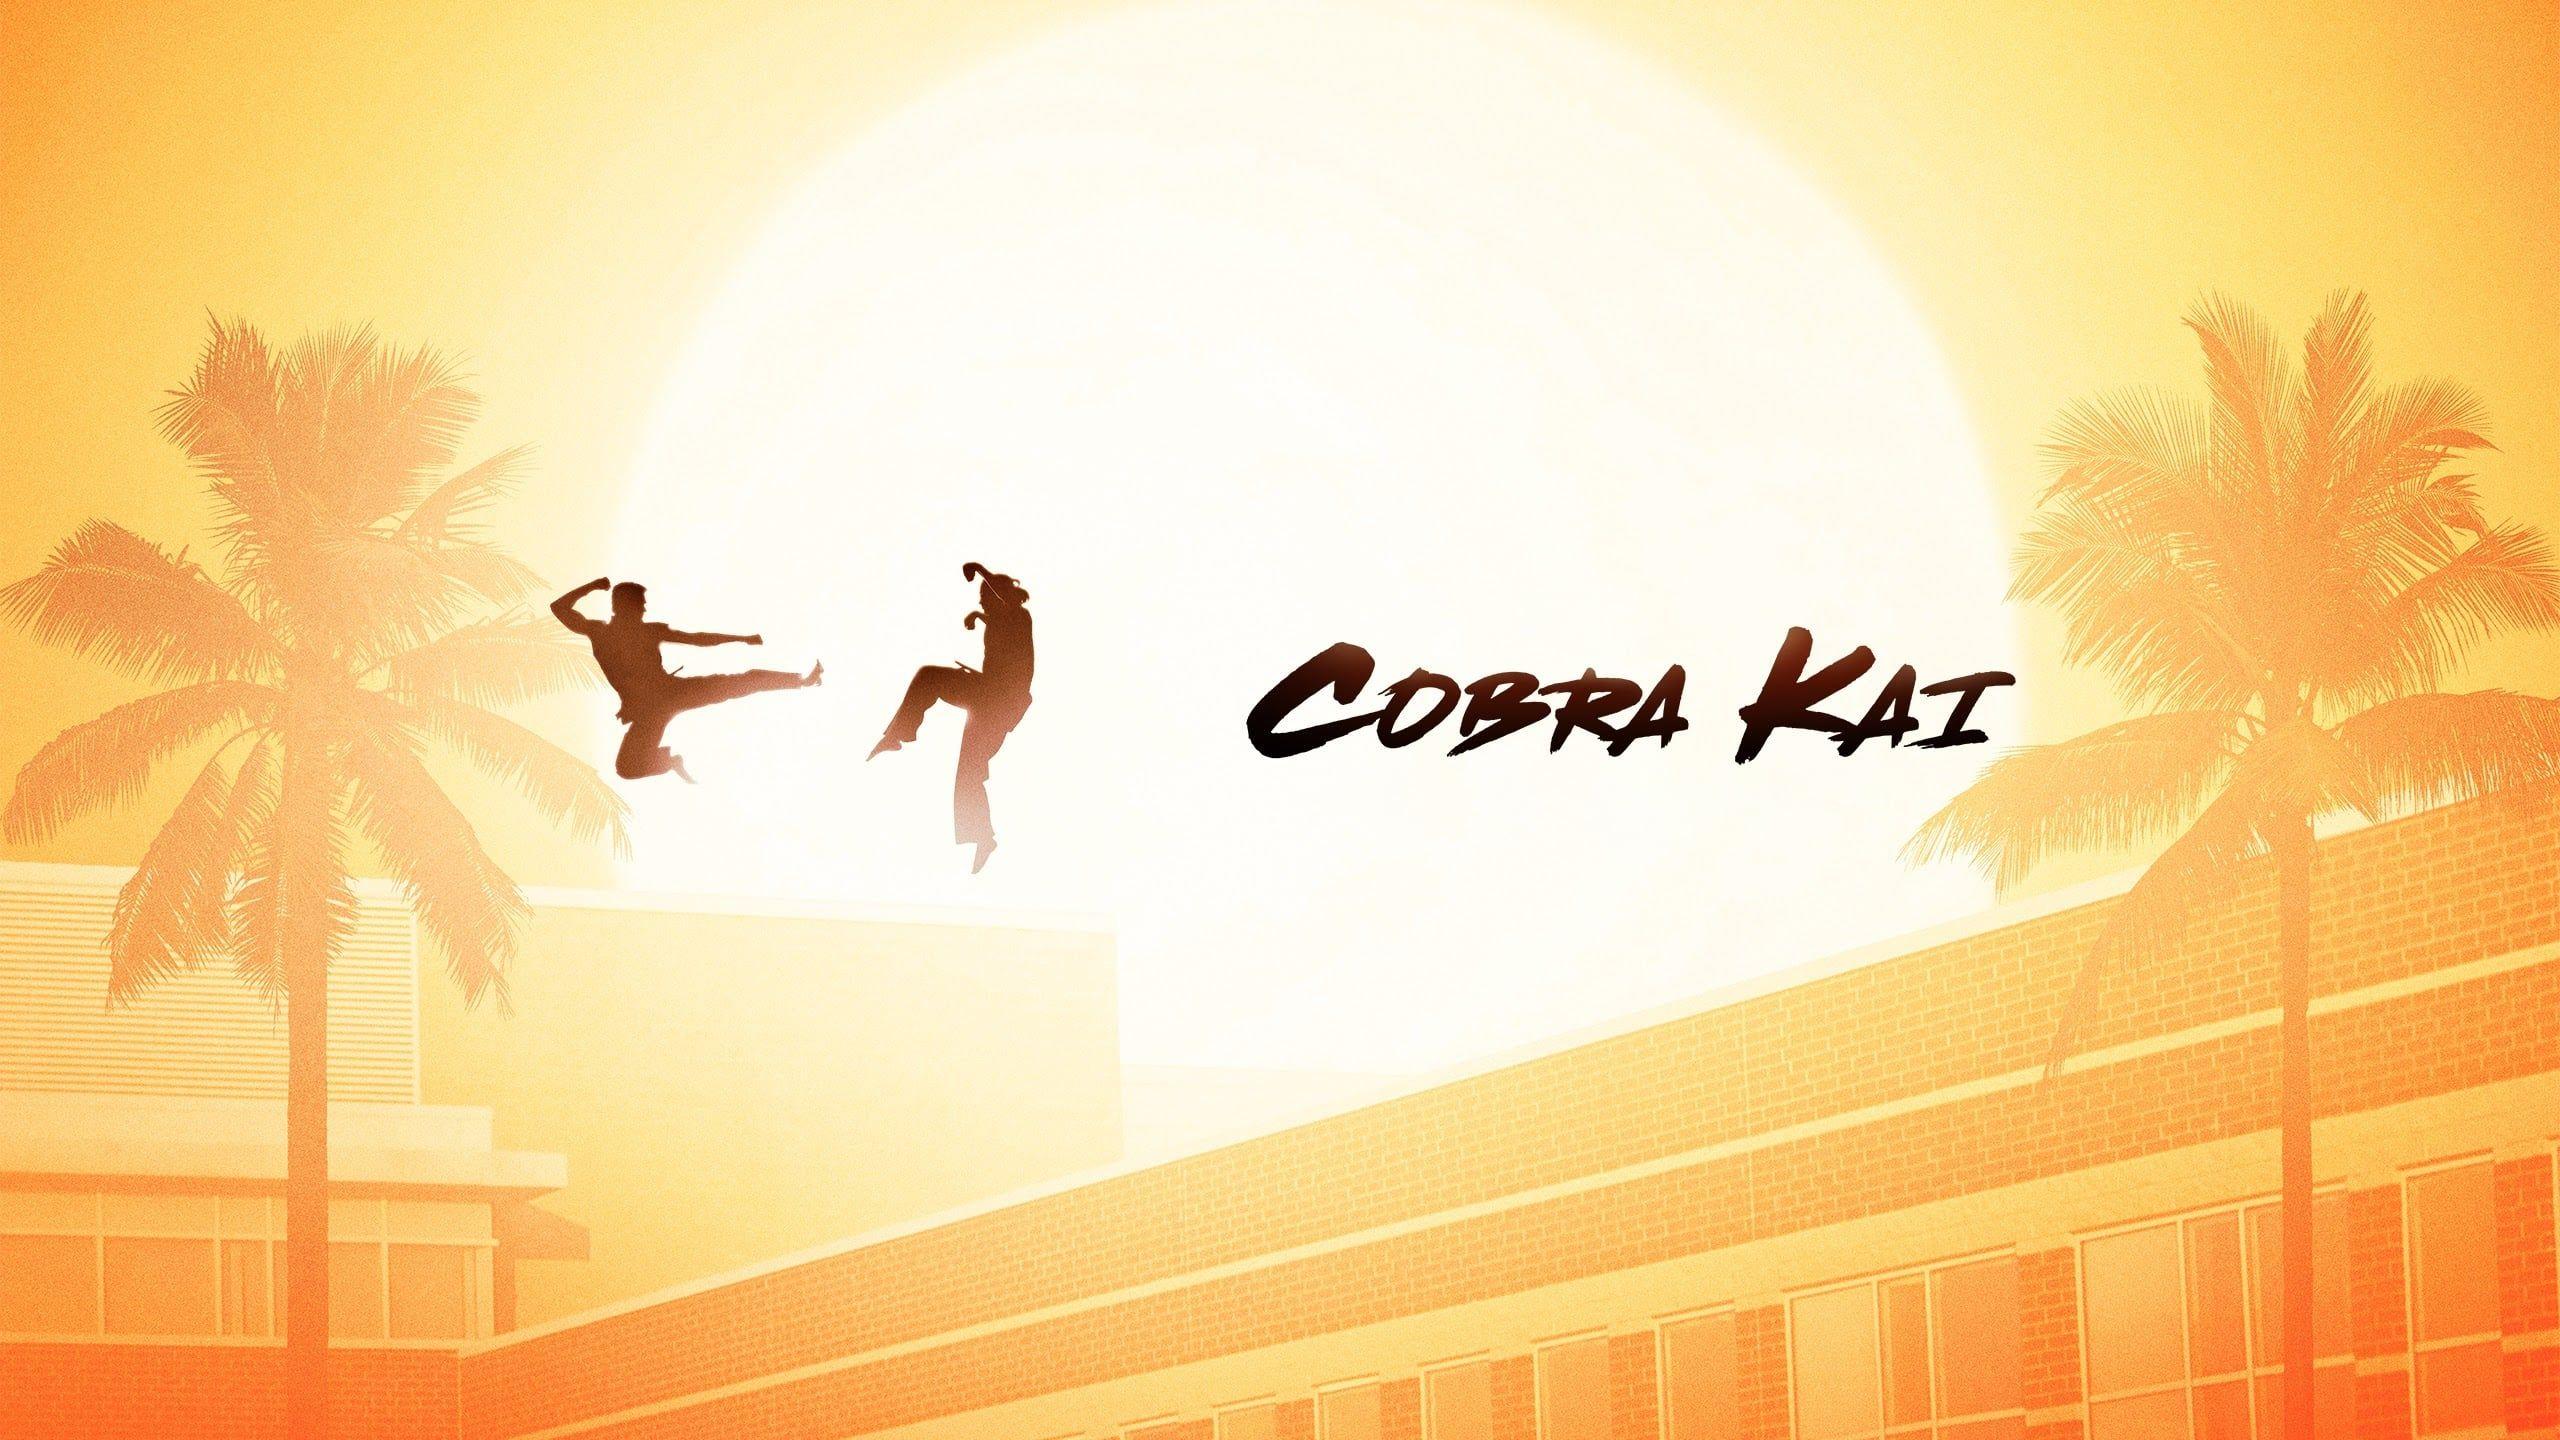 A Cobra Kai wallpaper featuring the two main characters, Daniel and Johnny, fighting in front of a sun and palm trees. - Cobra Kai